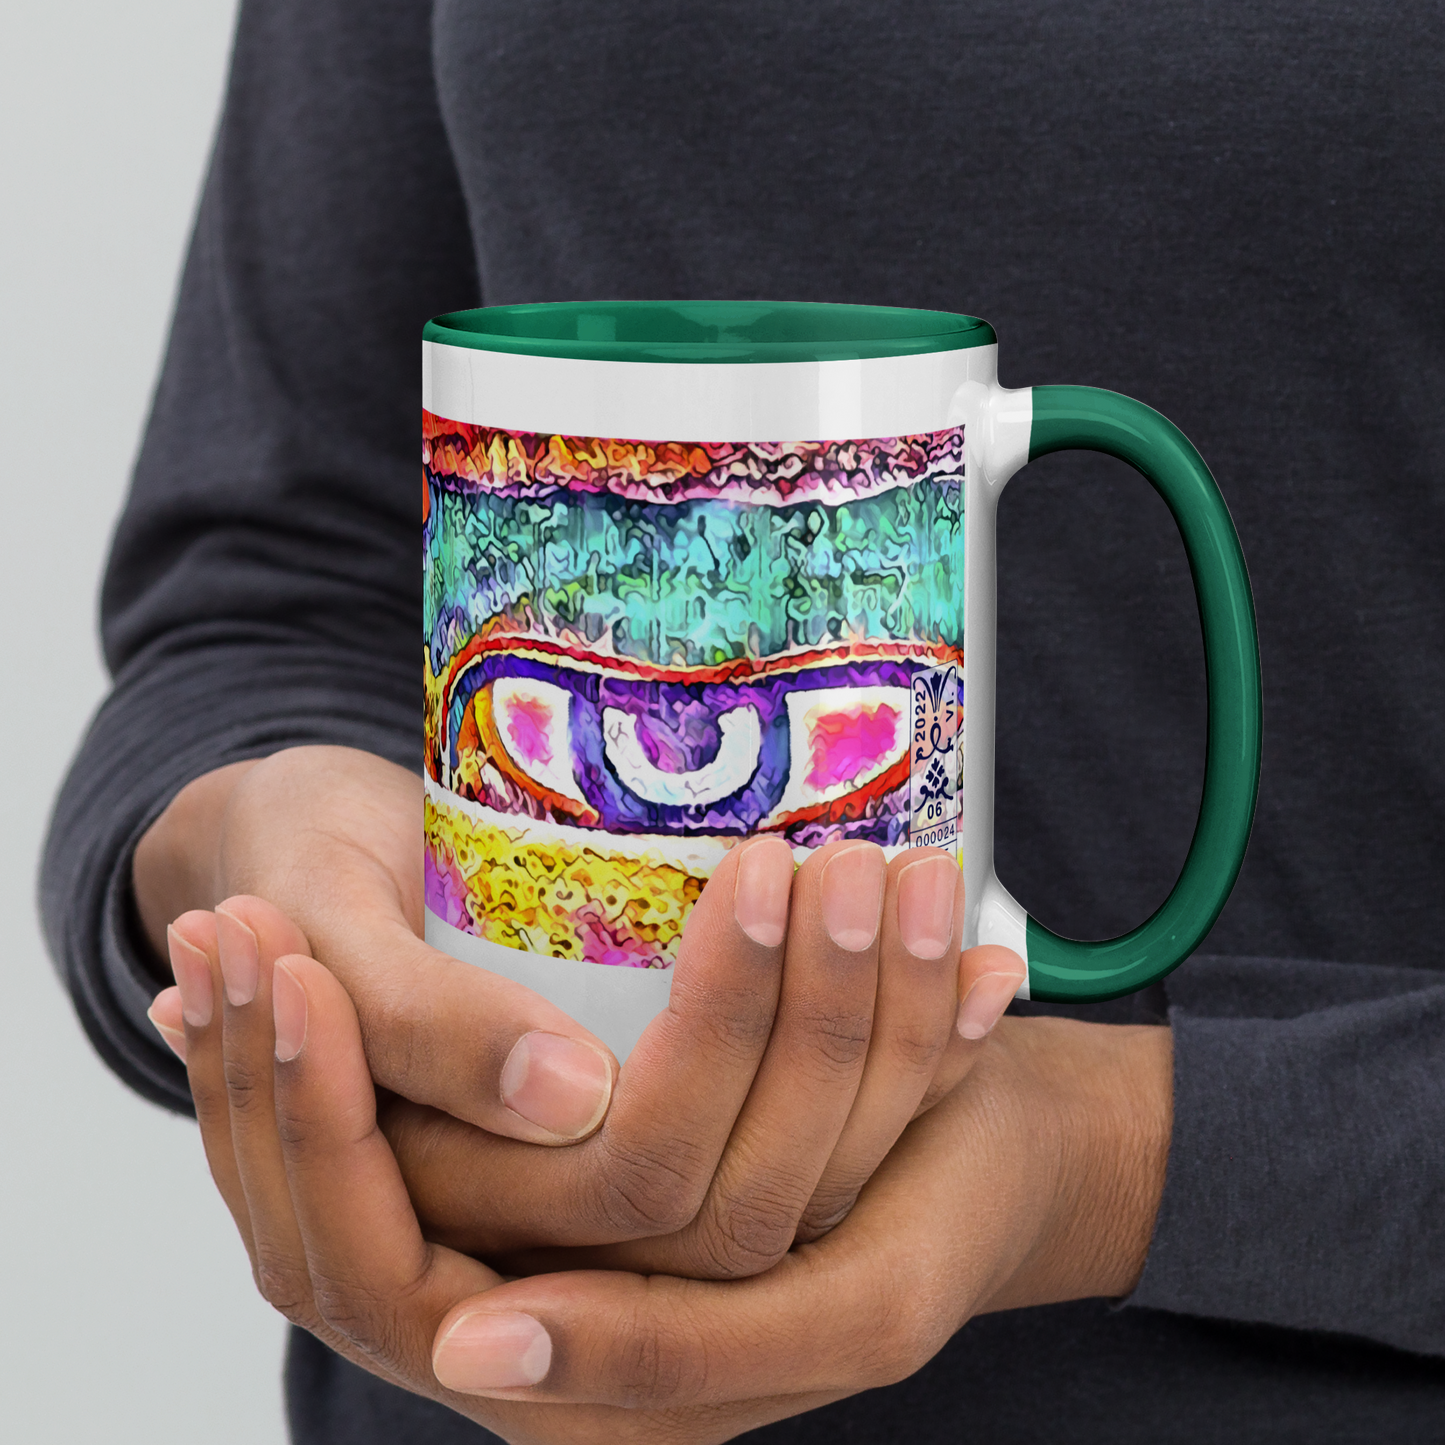 Ceramic Mug with Color Inside 'Just Seeing 1/5' artist-authorised edition of original artwork by Enmempin N. Midelobo